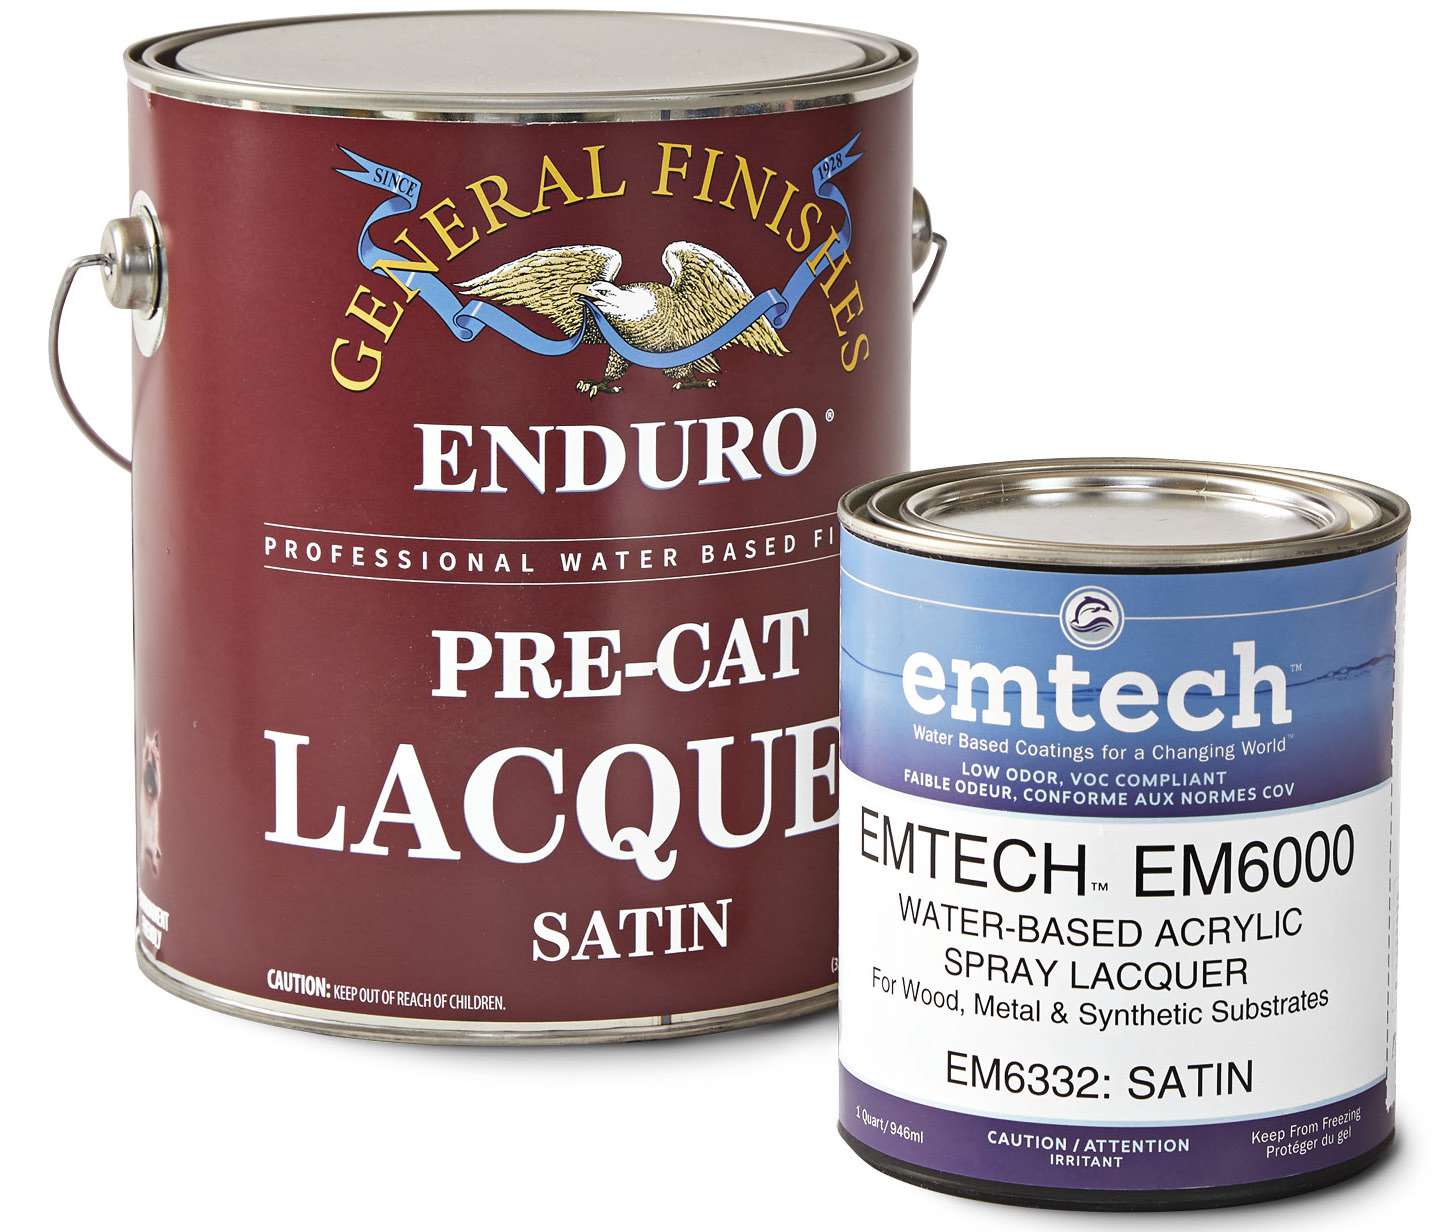 Photoof cans of water based lacquer